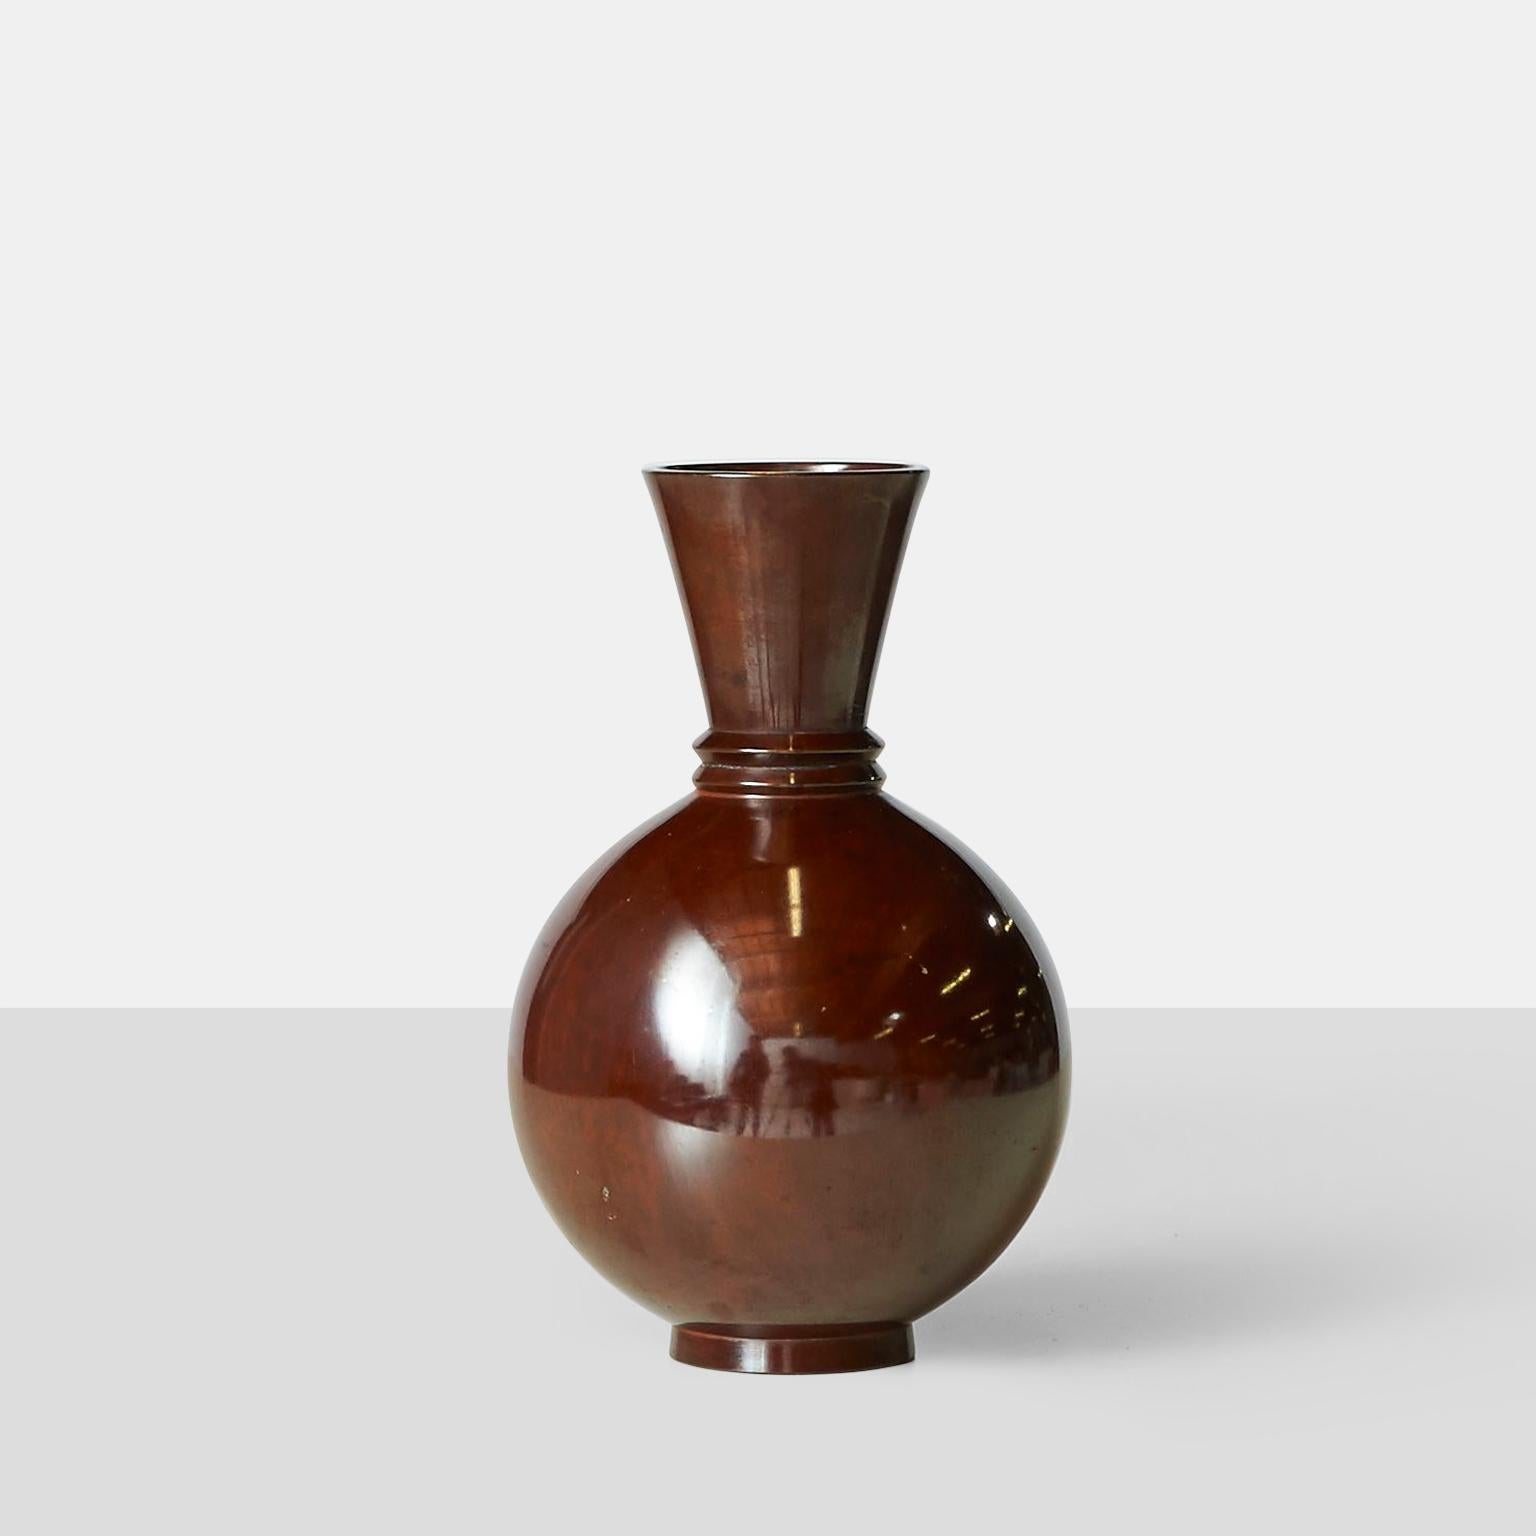 A decorative glossy Japanese modernist bronze vase with a fluted neck, with some mild patination. Signed on the base. 